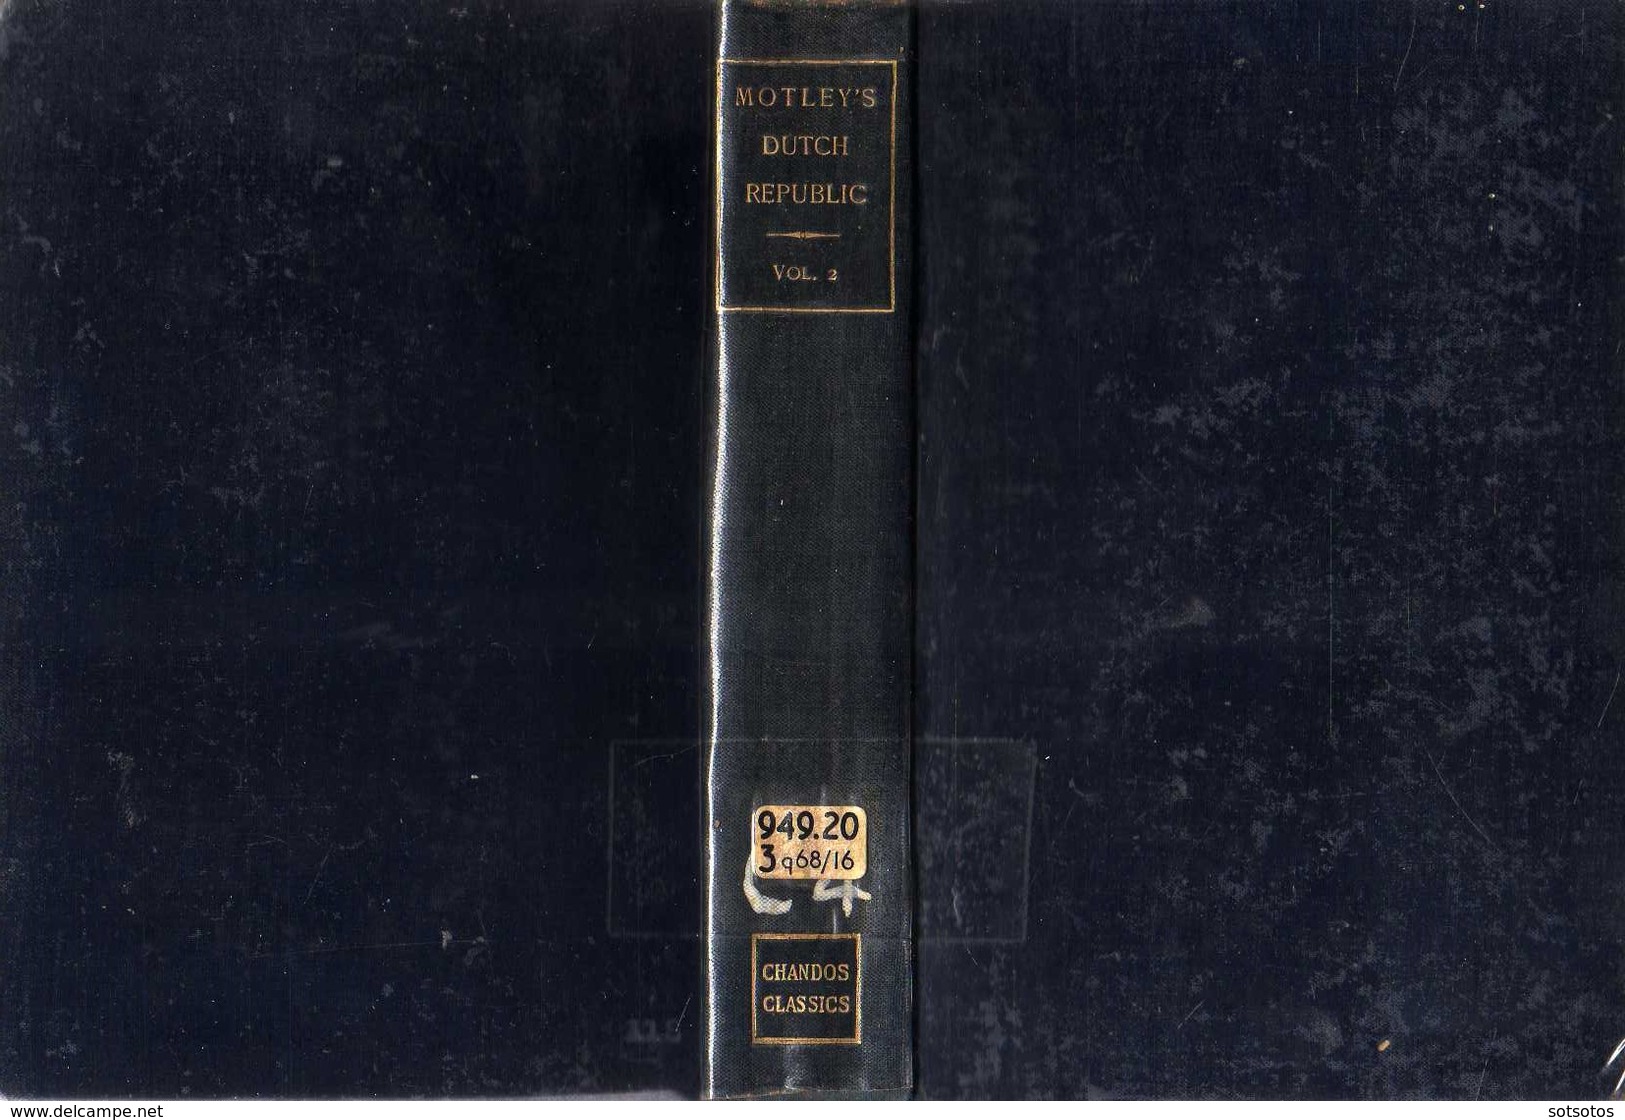 The RISE Of The DUTCH REPUBLIC Vol. II: J. LOTHROP MOTLEY And A.J. MANSFIELD, Ed. Fr. WARNE (1902?), 572 Pages, Good Con - Antike